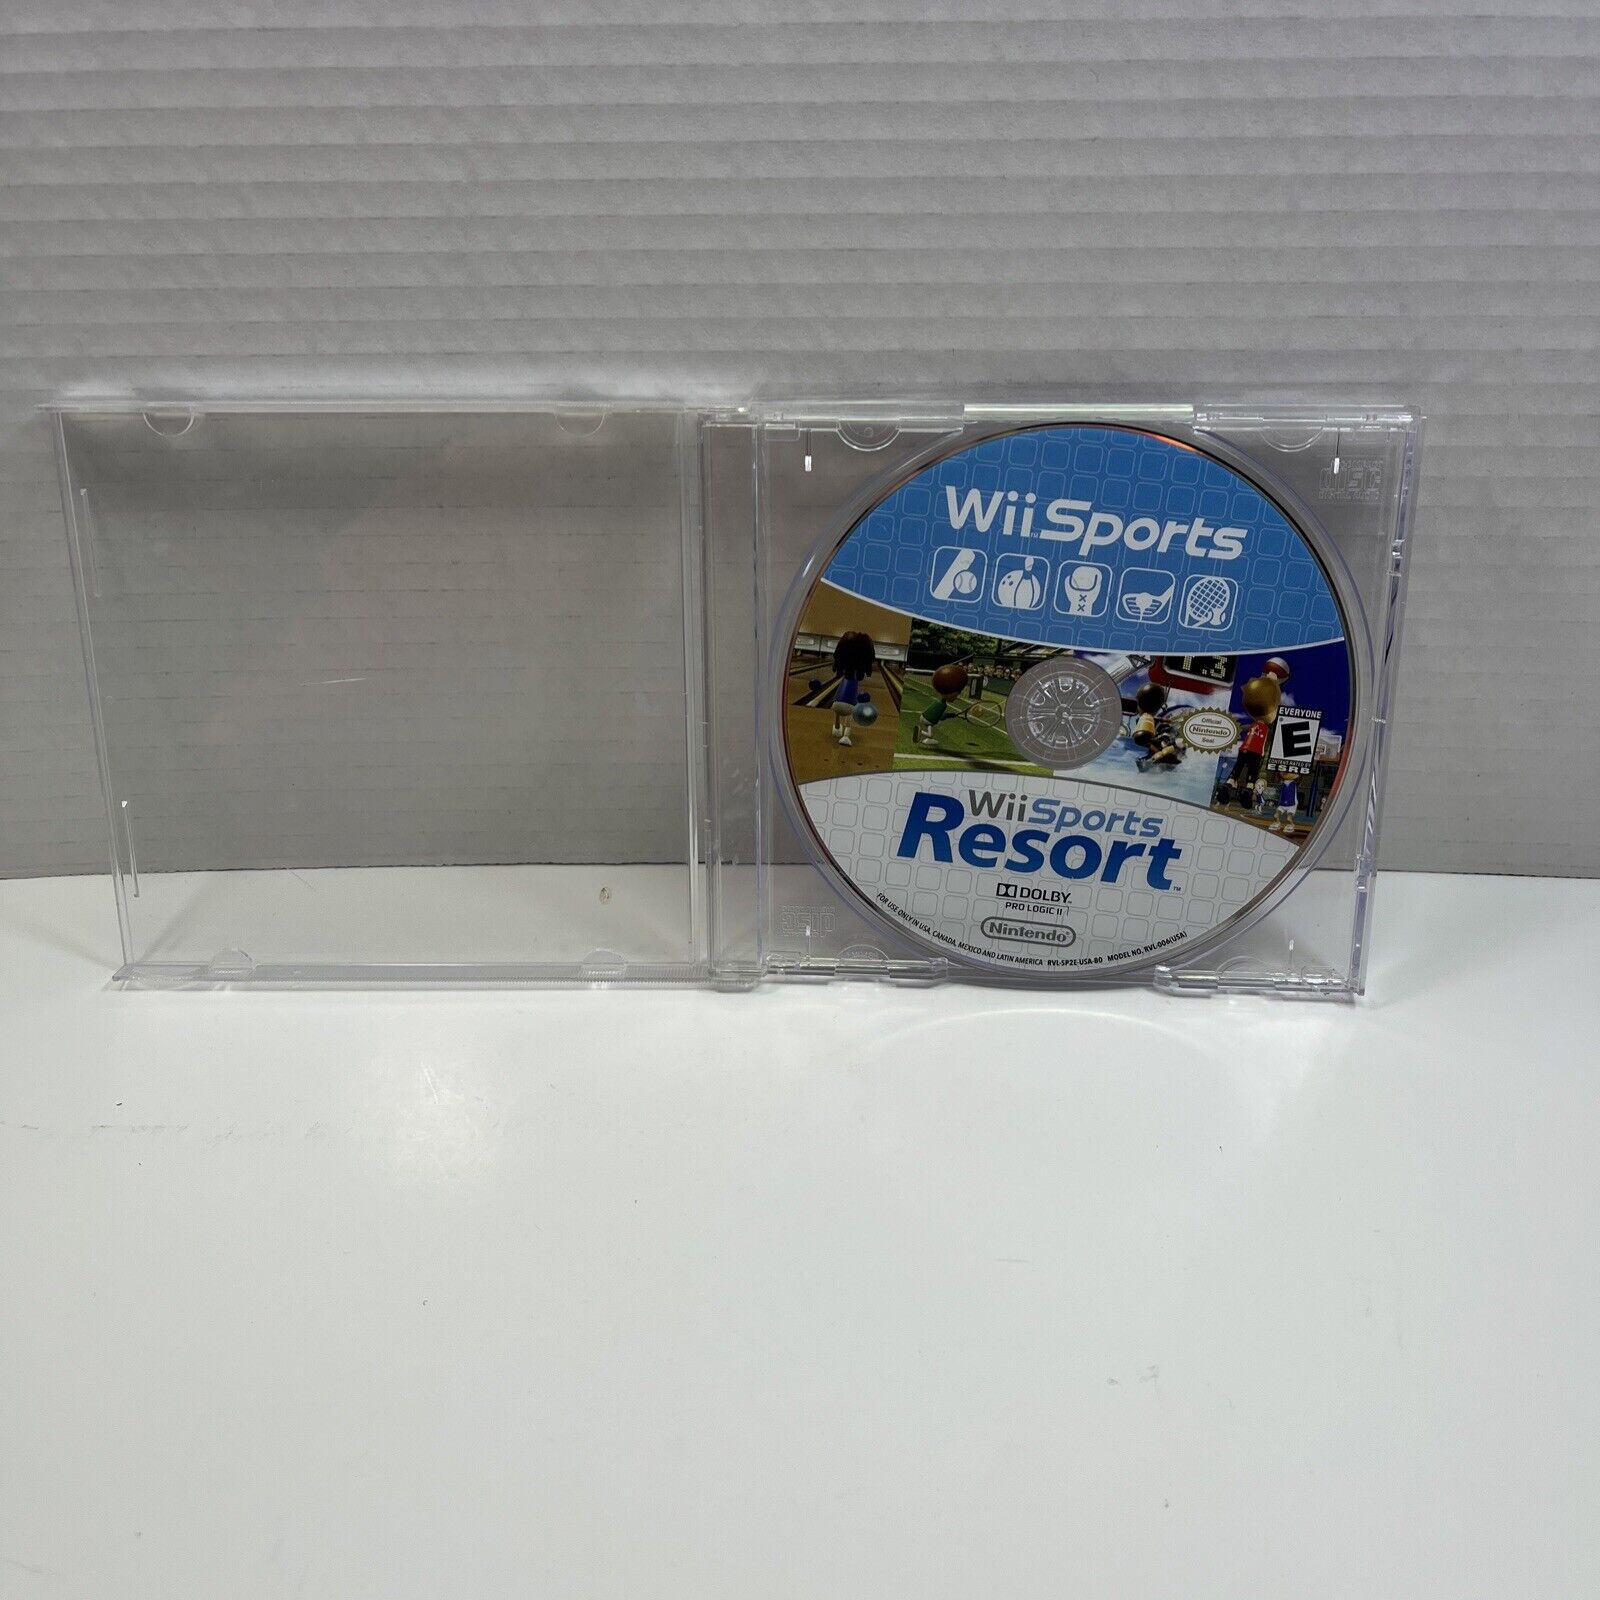 Wii Sports & Wii Sports Resort 2 in 1 Combo Disc - Tested and Working DISC ONLY